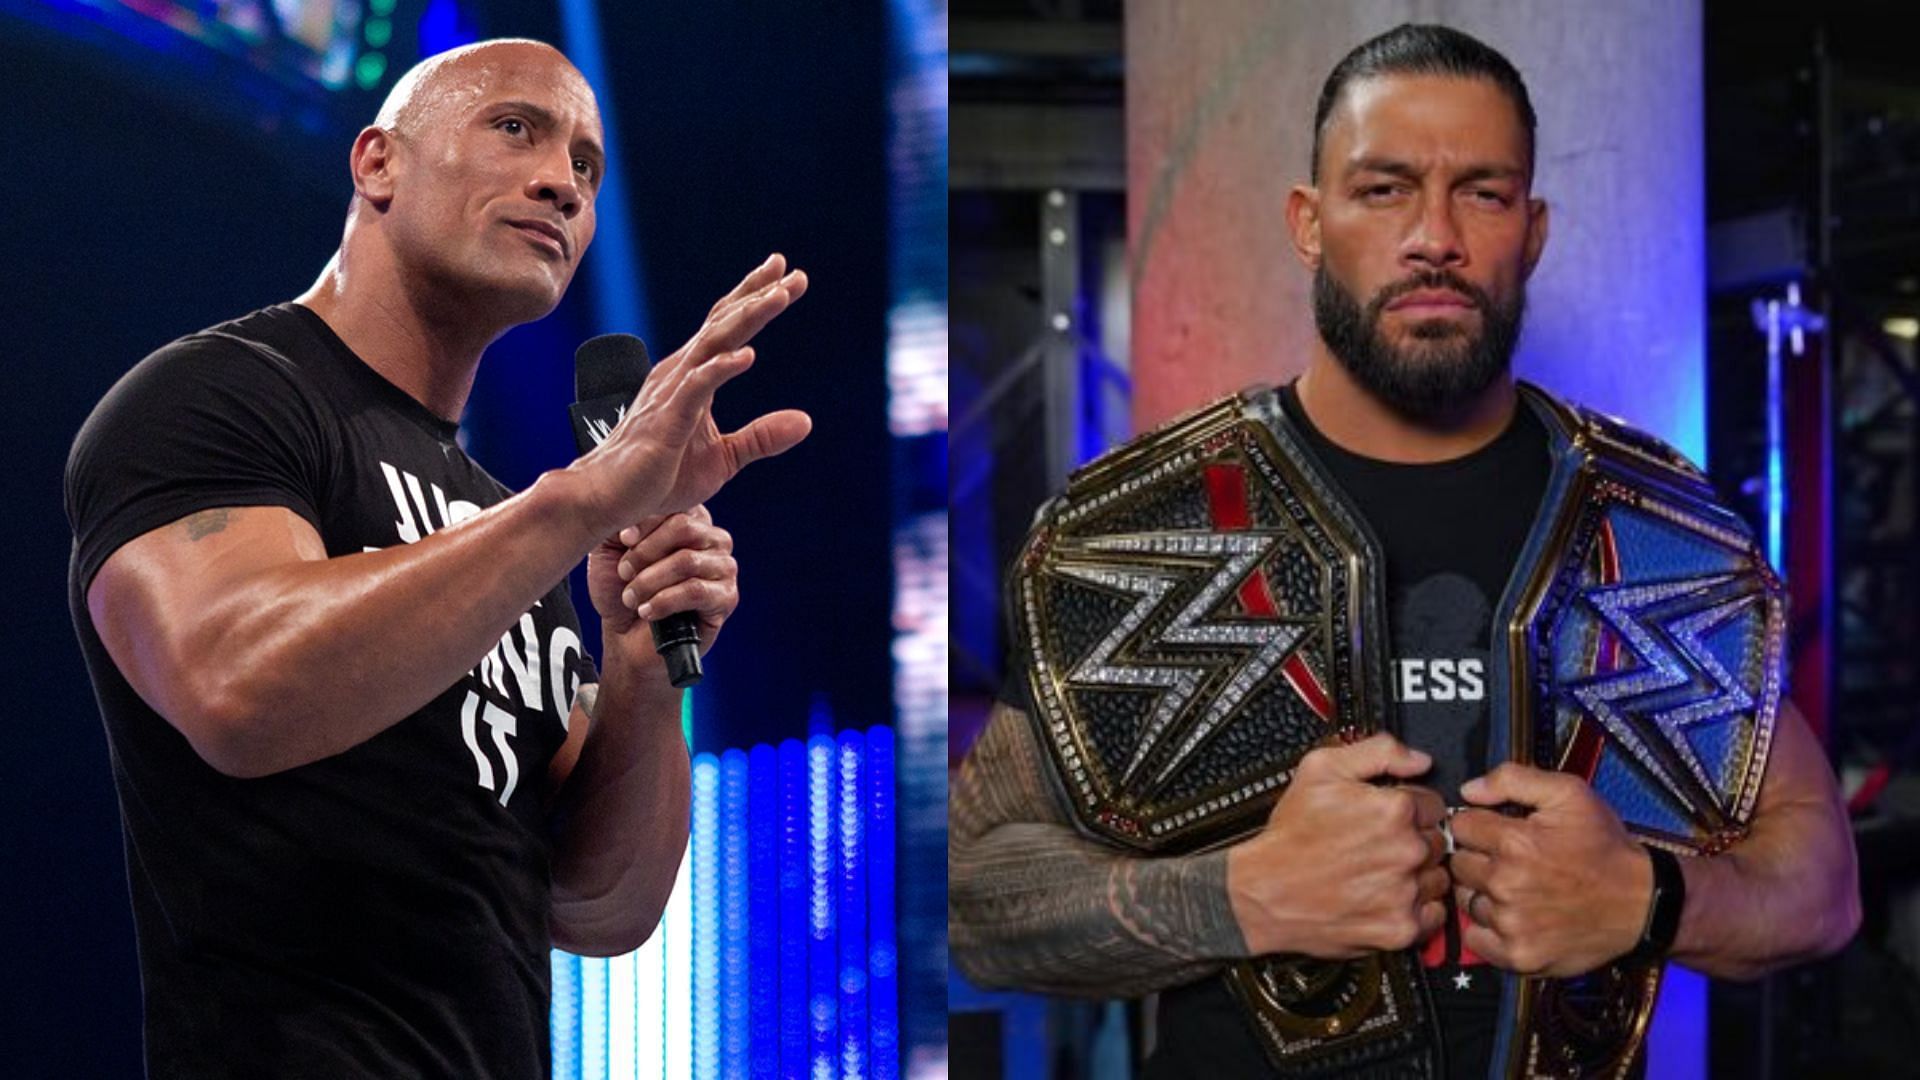 The Rock and Roman Reigns look set to face each other at WrestleMania